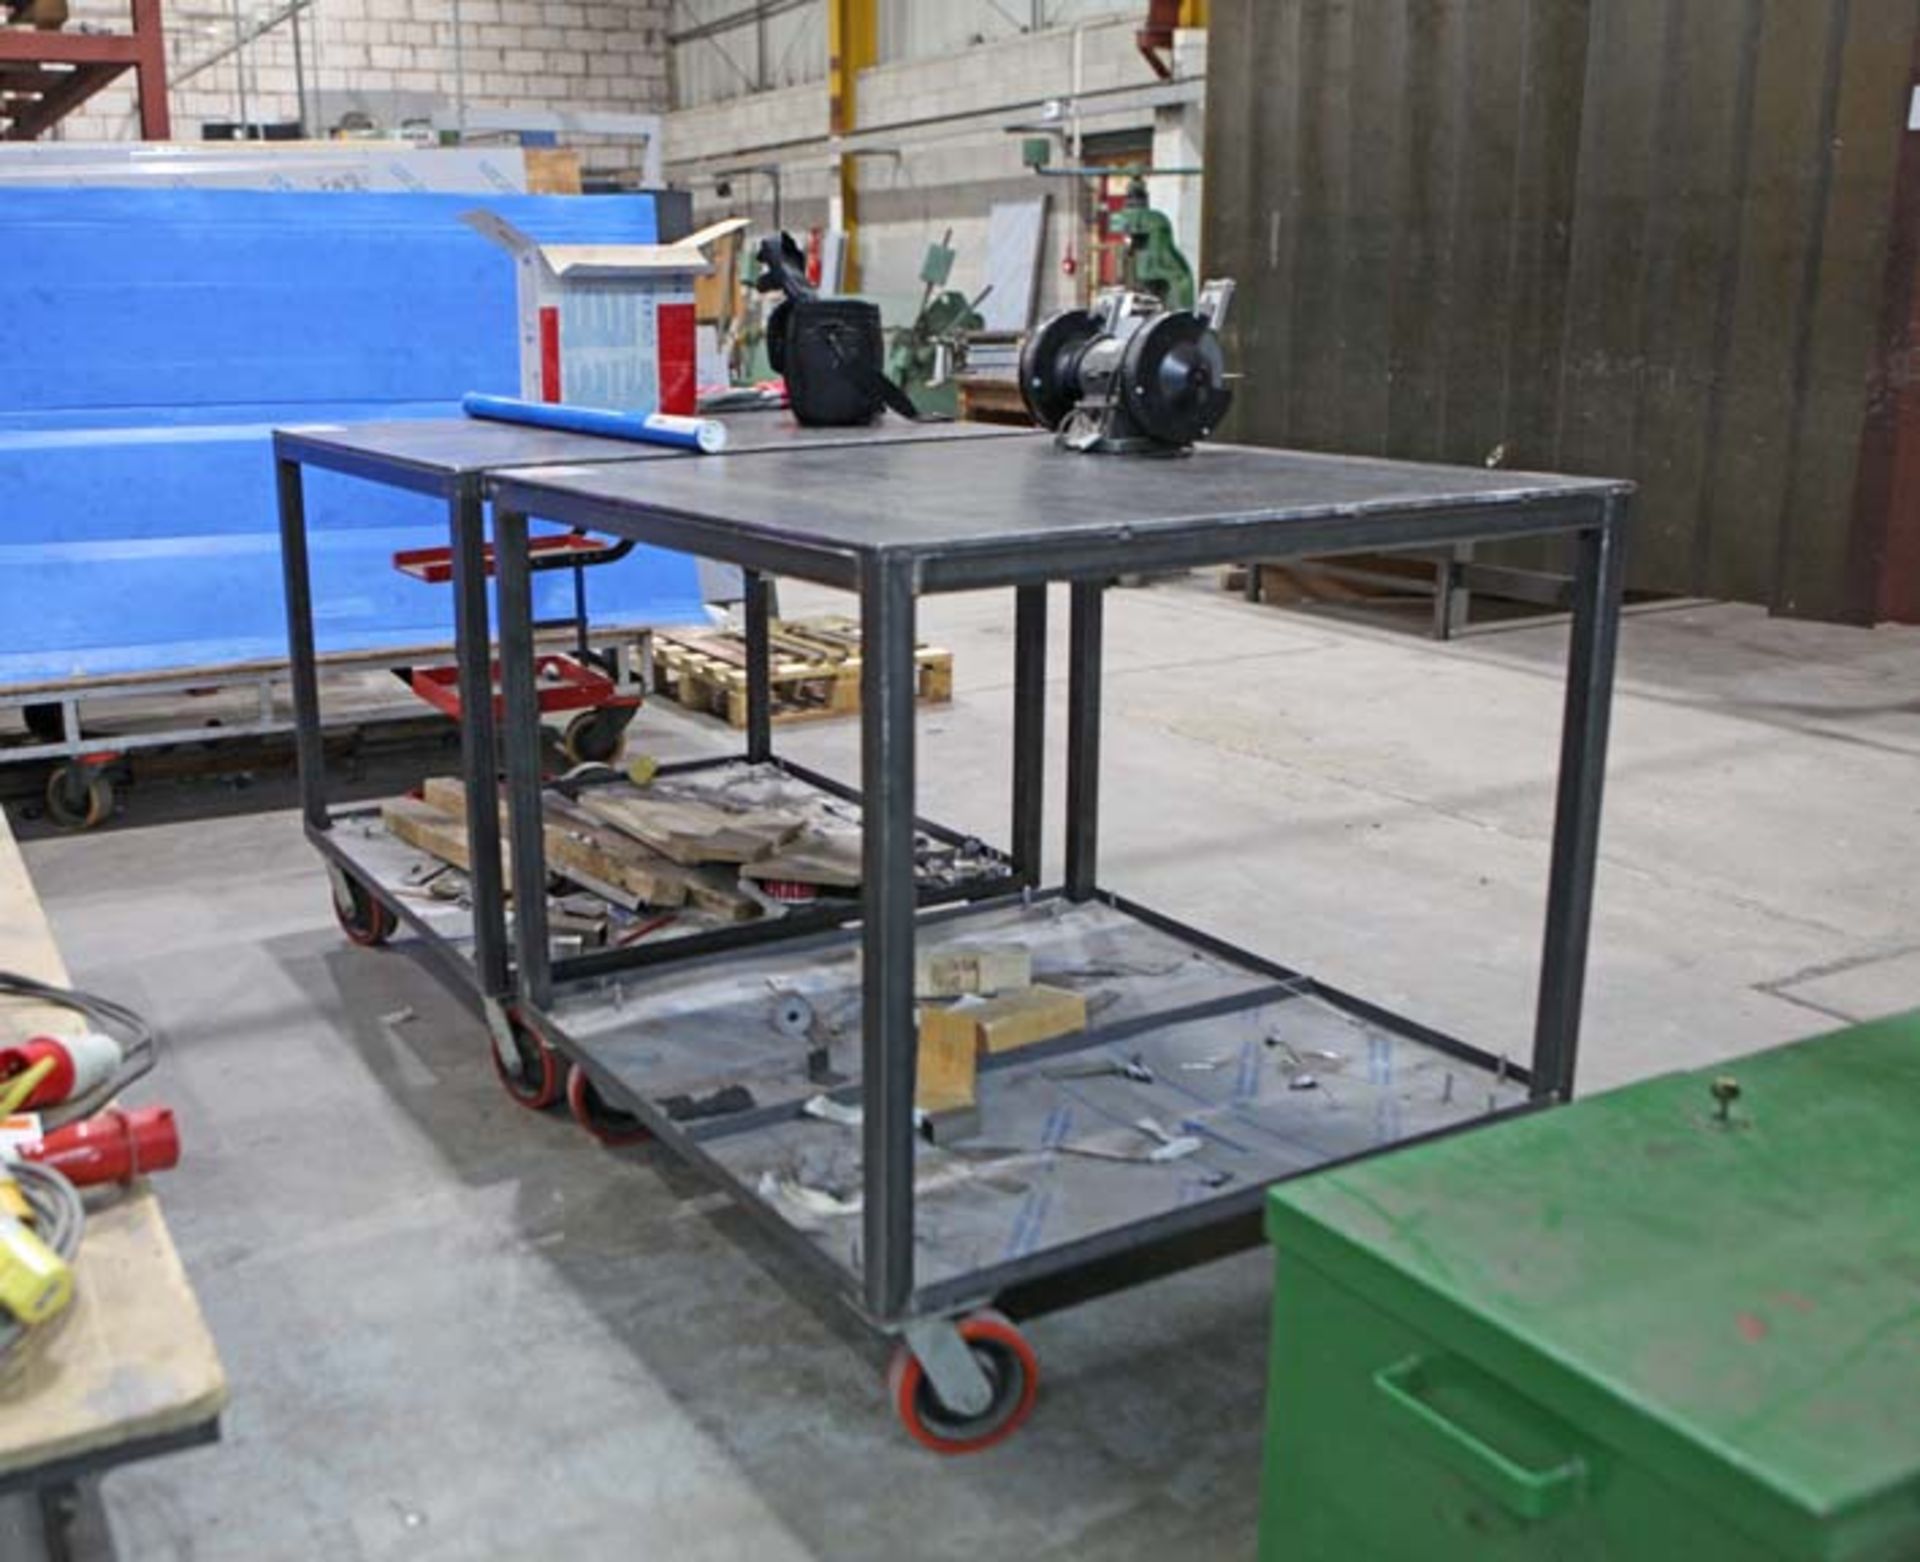 2 Steel work tables 1000 square